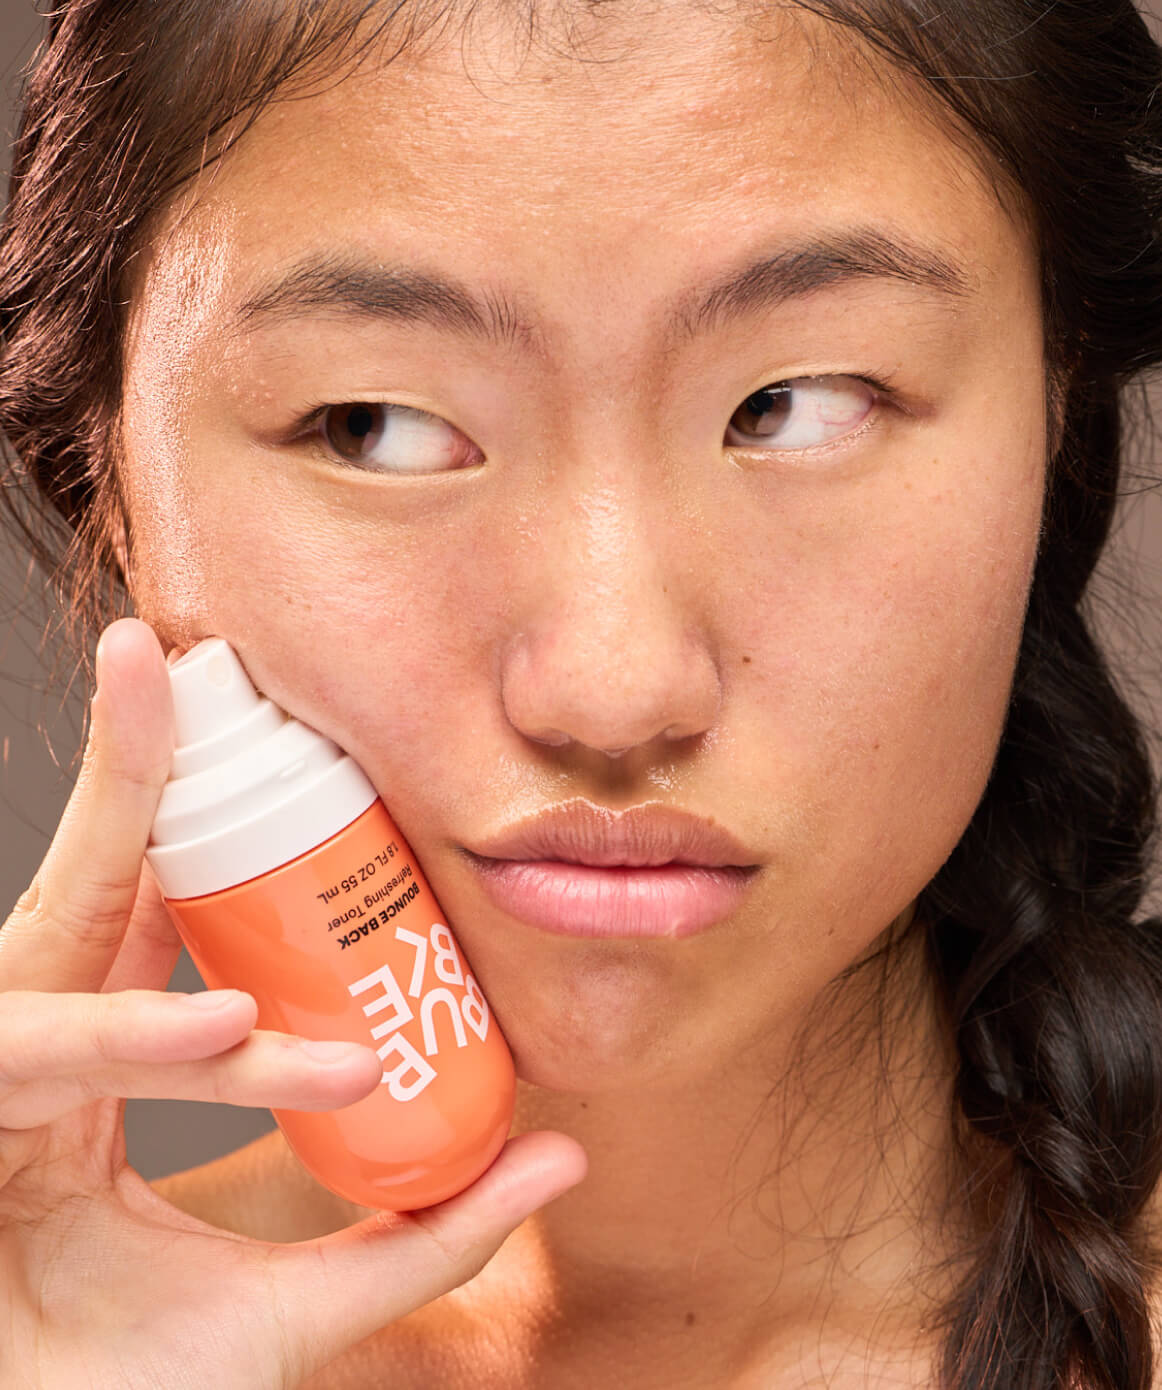 Asian young woman holding a spray-on toner for all skintypes. Good when oil or shine pop up. Free of alcohols, parabens, artificial color & added fragrance materials. Cruelty-free and vegan.